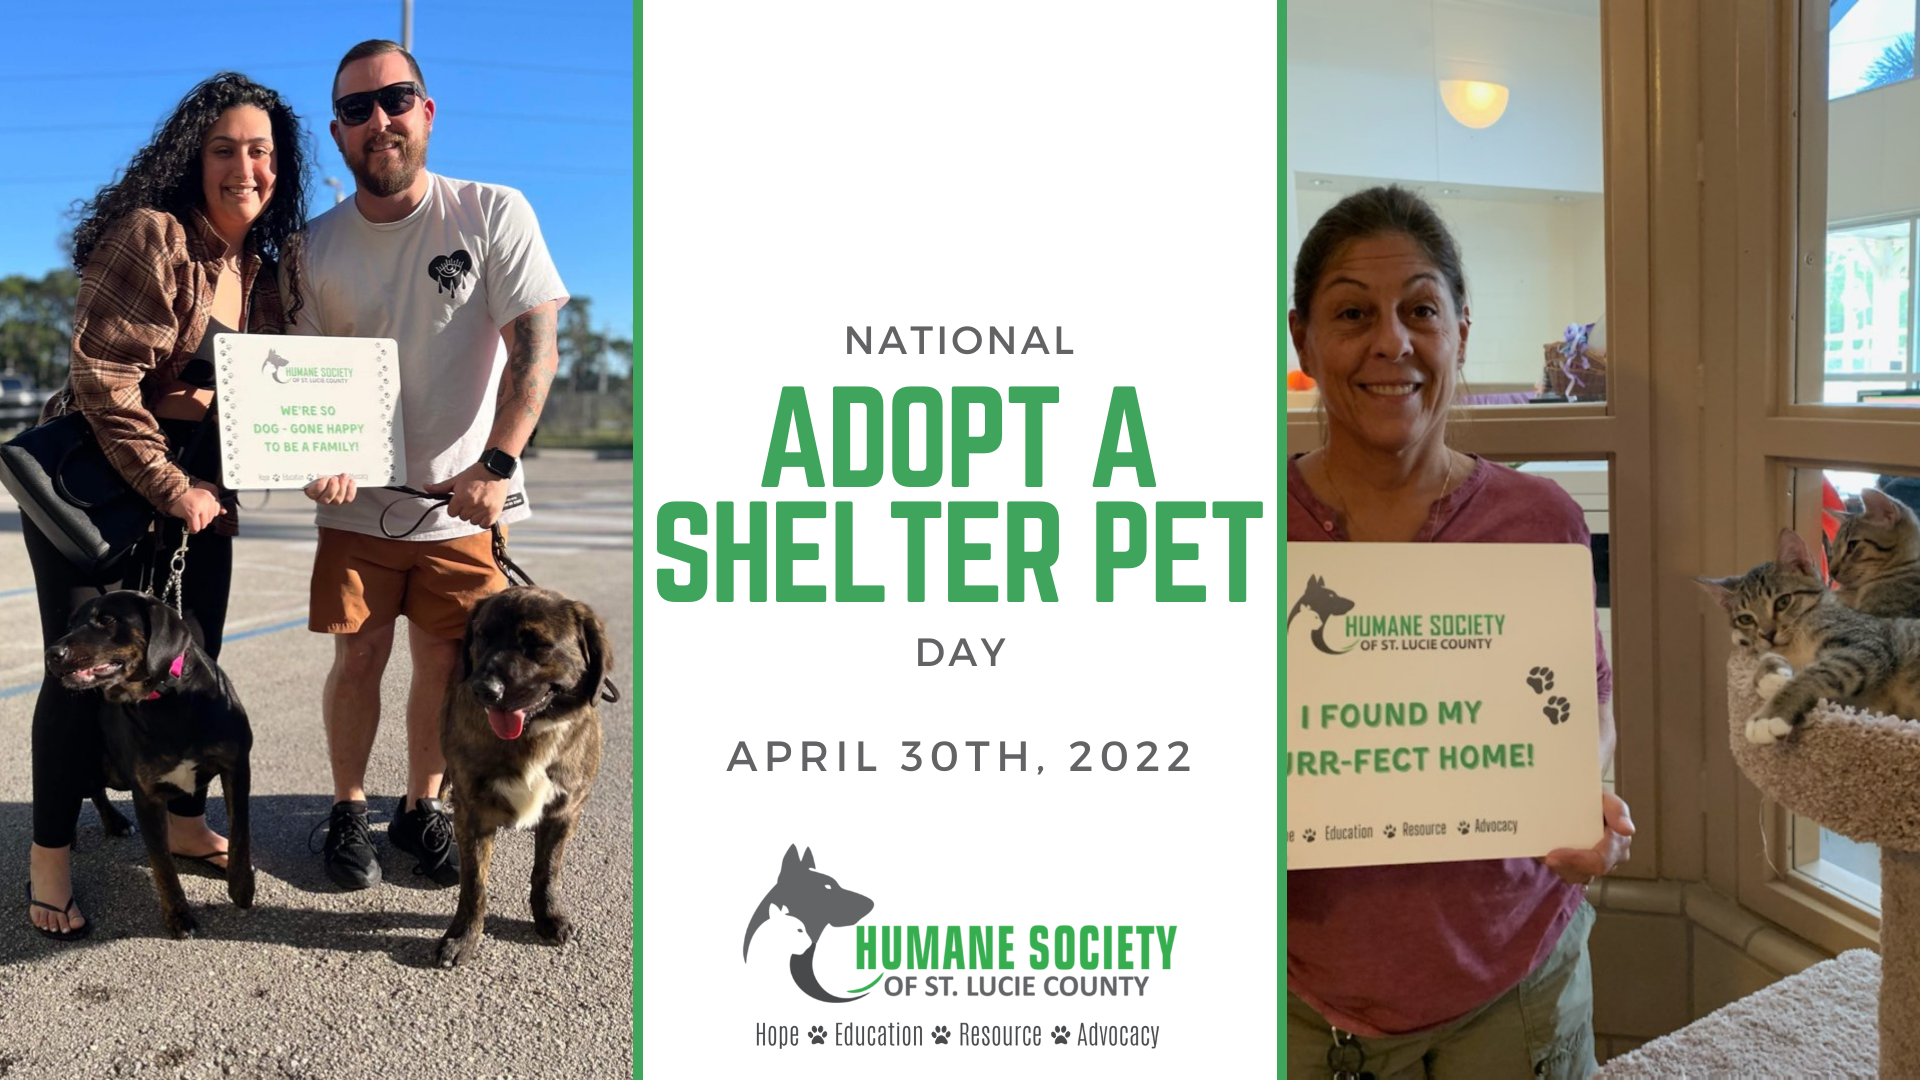 National Adopt a Shelter Pet Day at the Humane Society of St. Lucie County, April 30th